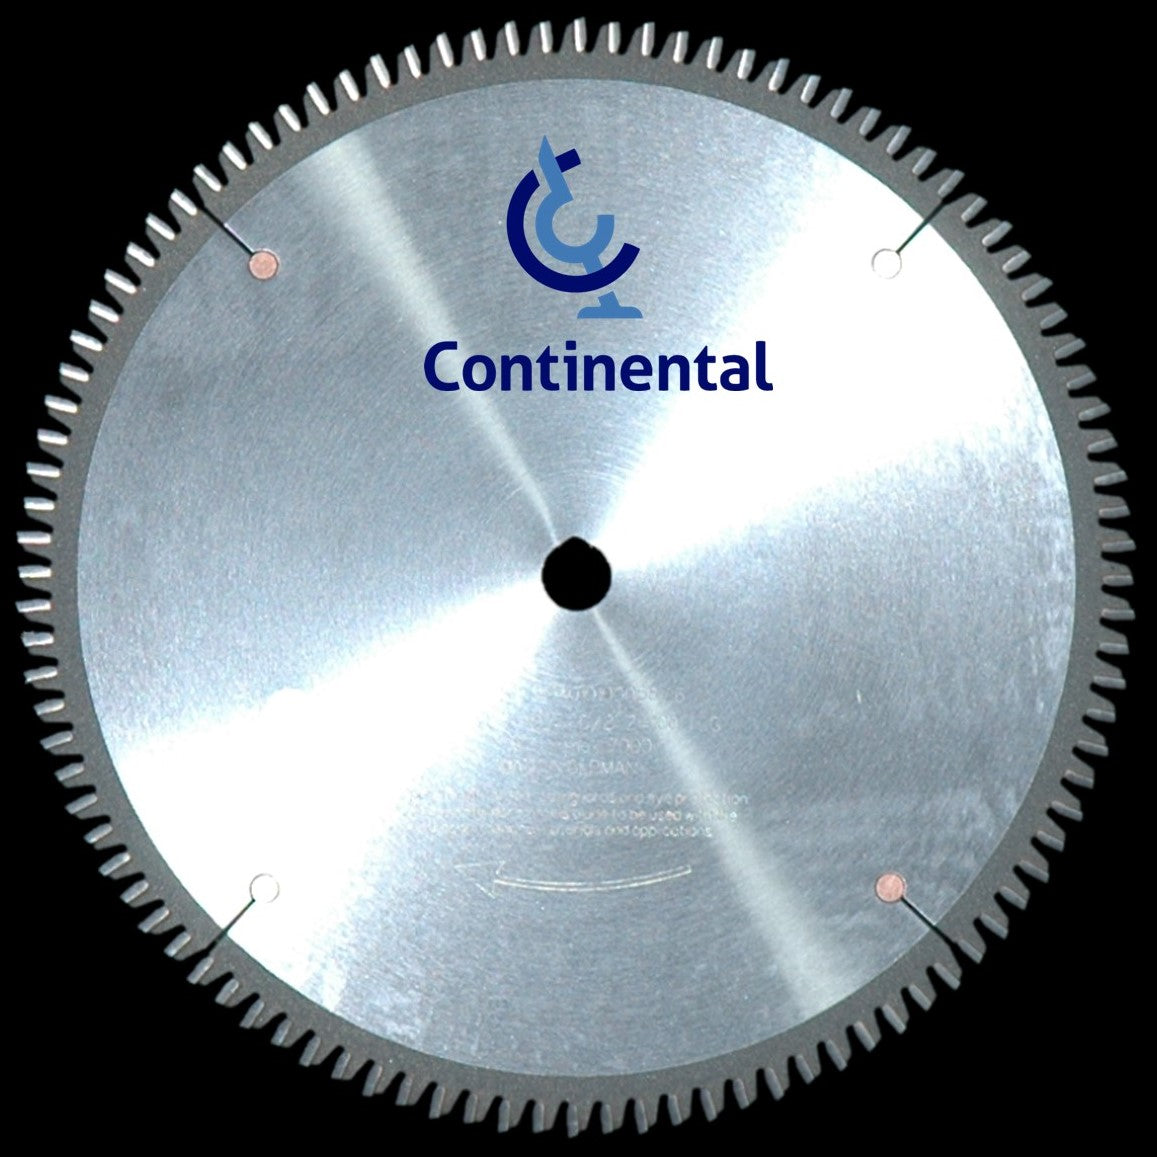 C-1010N Continental Saw Blade 10"x100 tooth 5/8" bore Triple Chip 5' Neg Hook